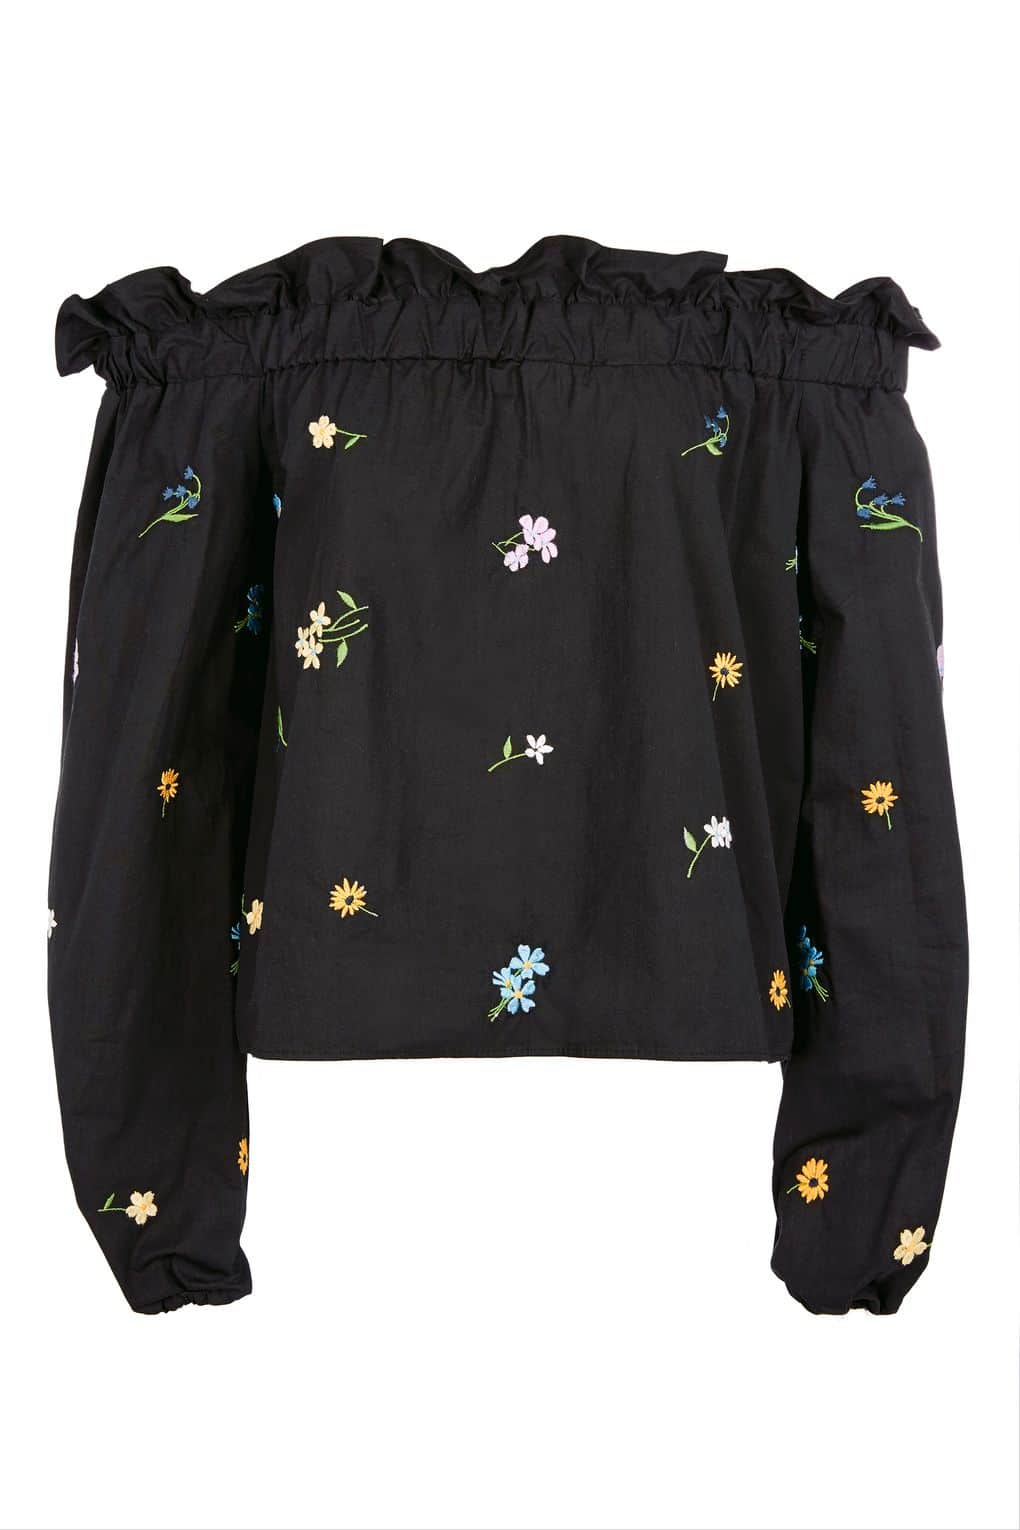 The Fashion Magpie TopShop Embroidered Top